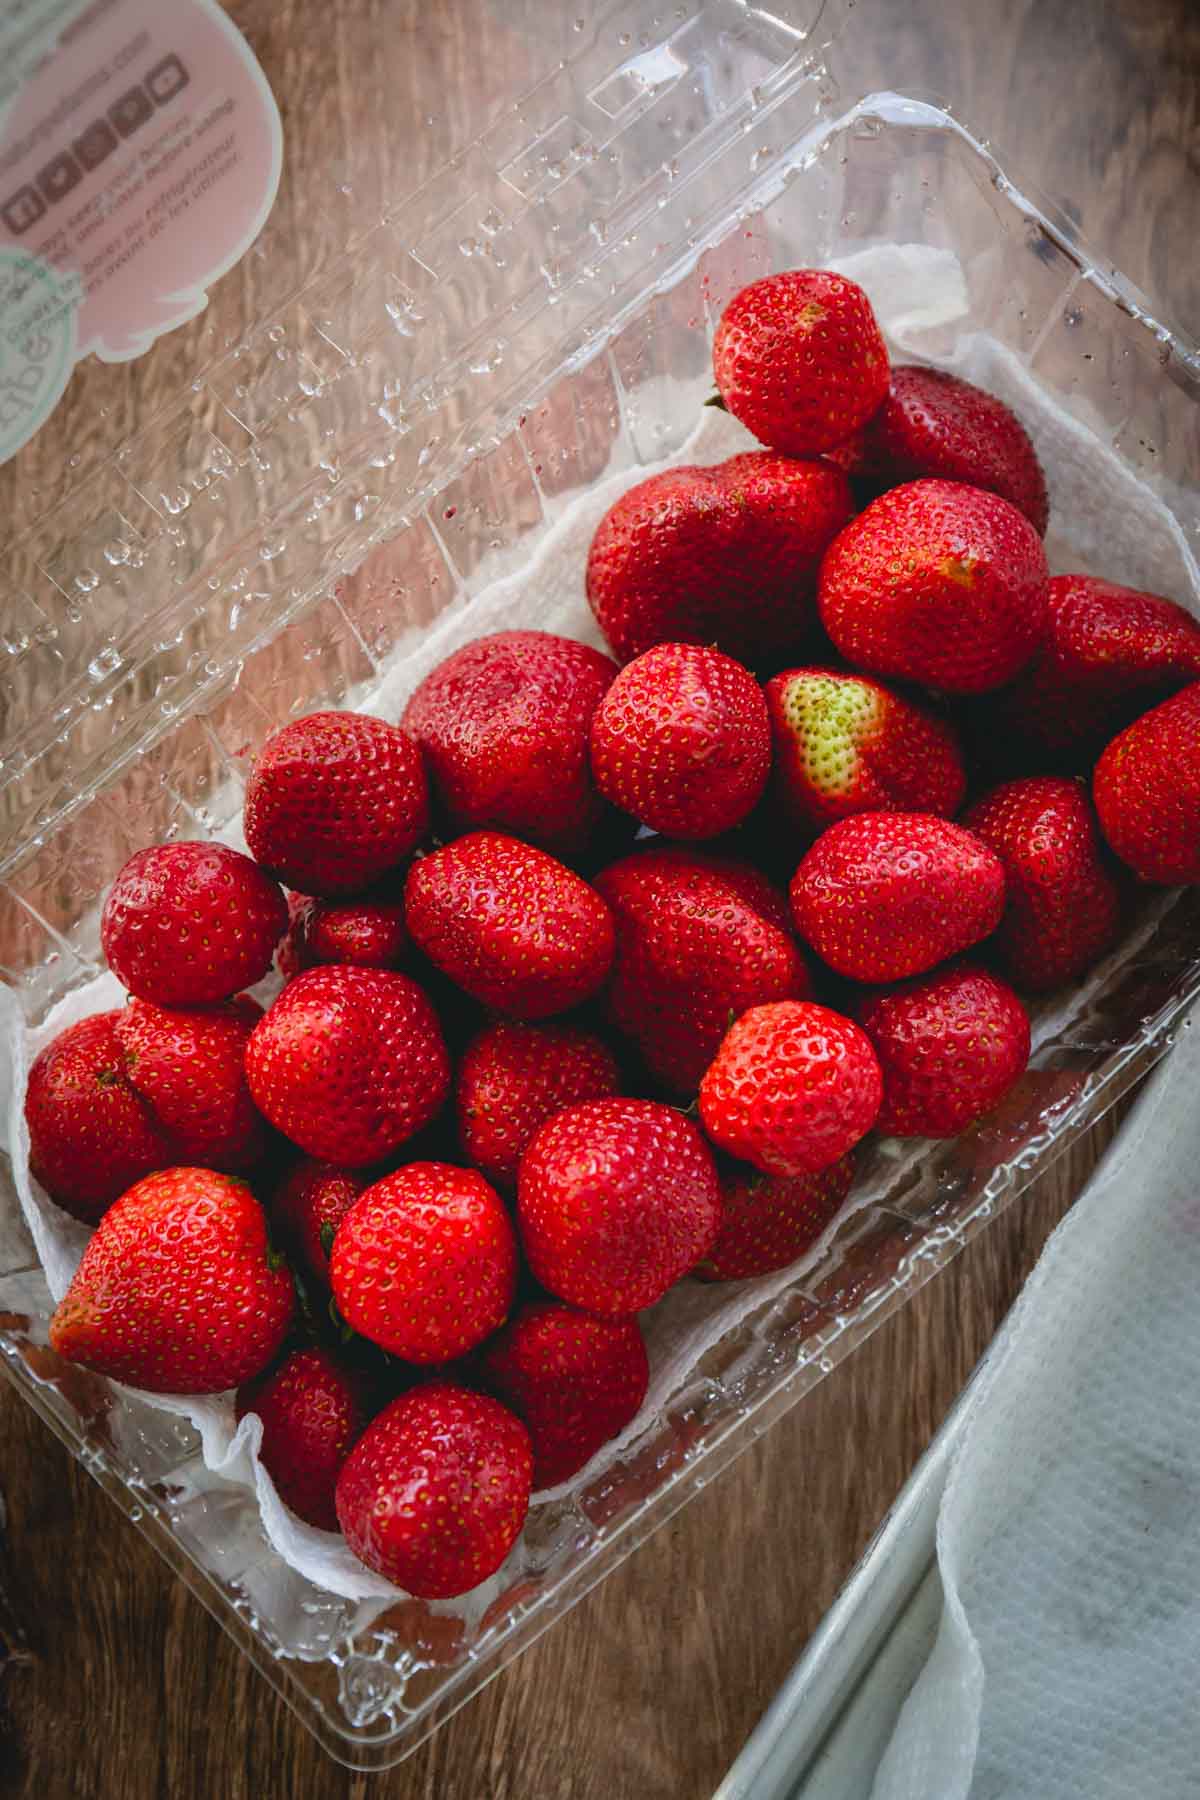 A paper towel-lined clamshell container of fresh strawberries.